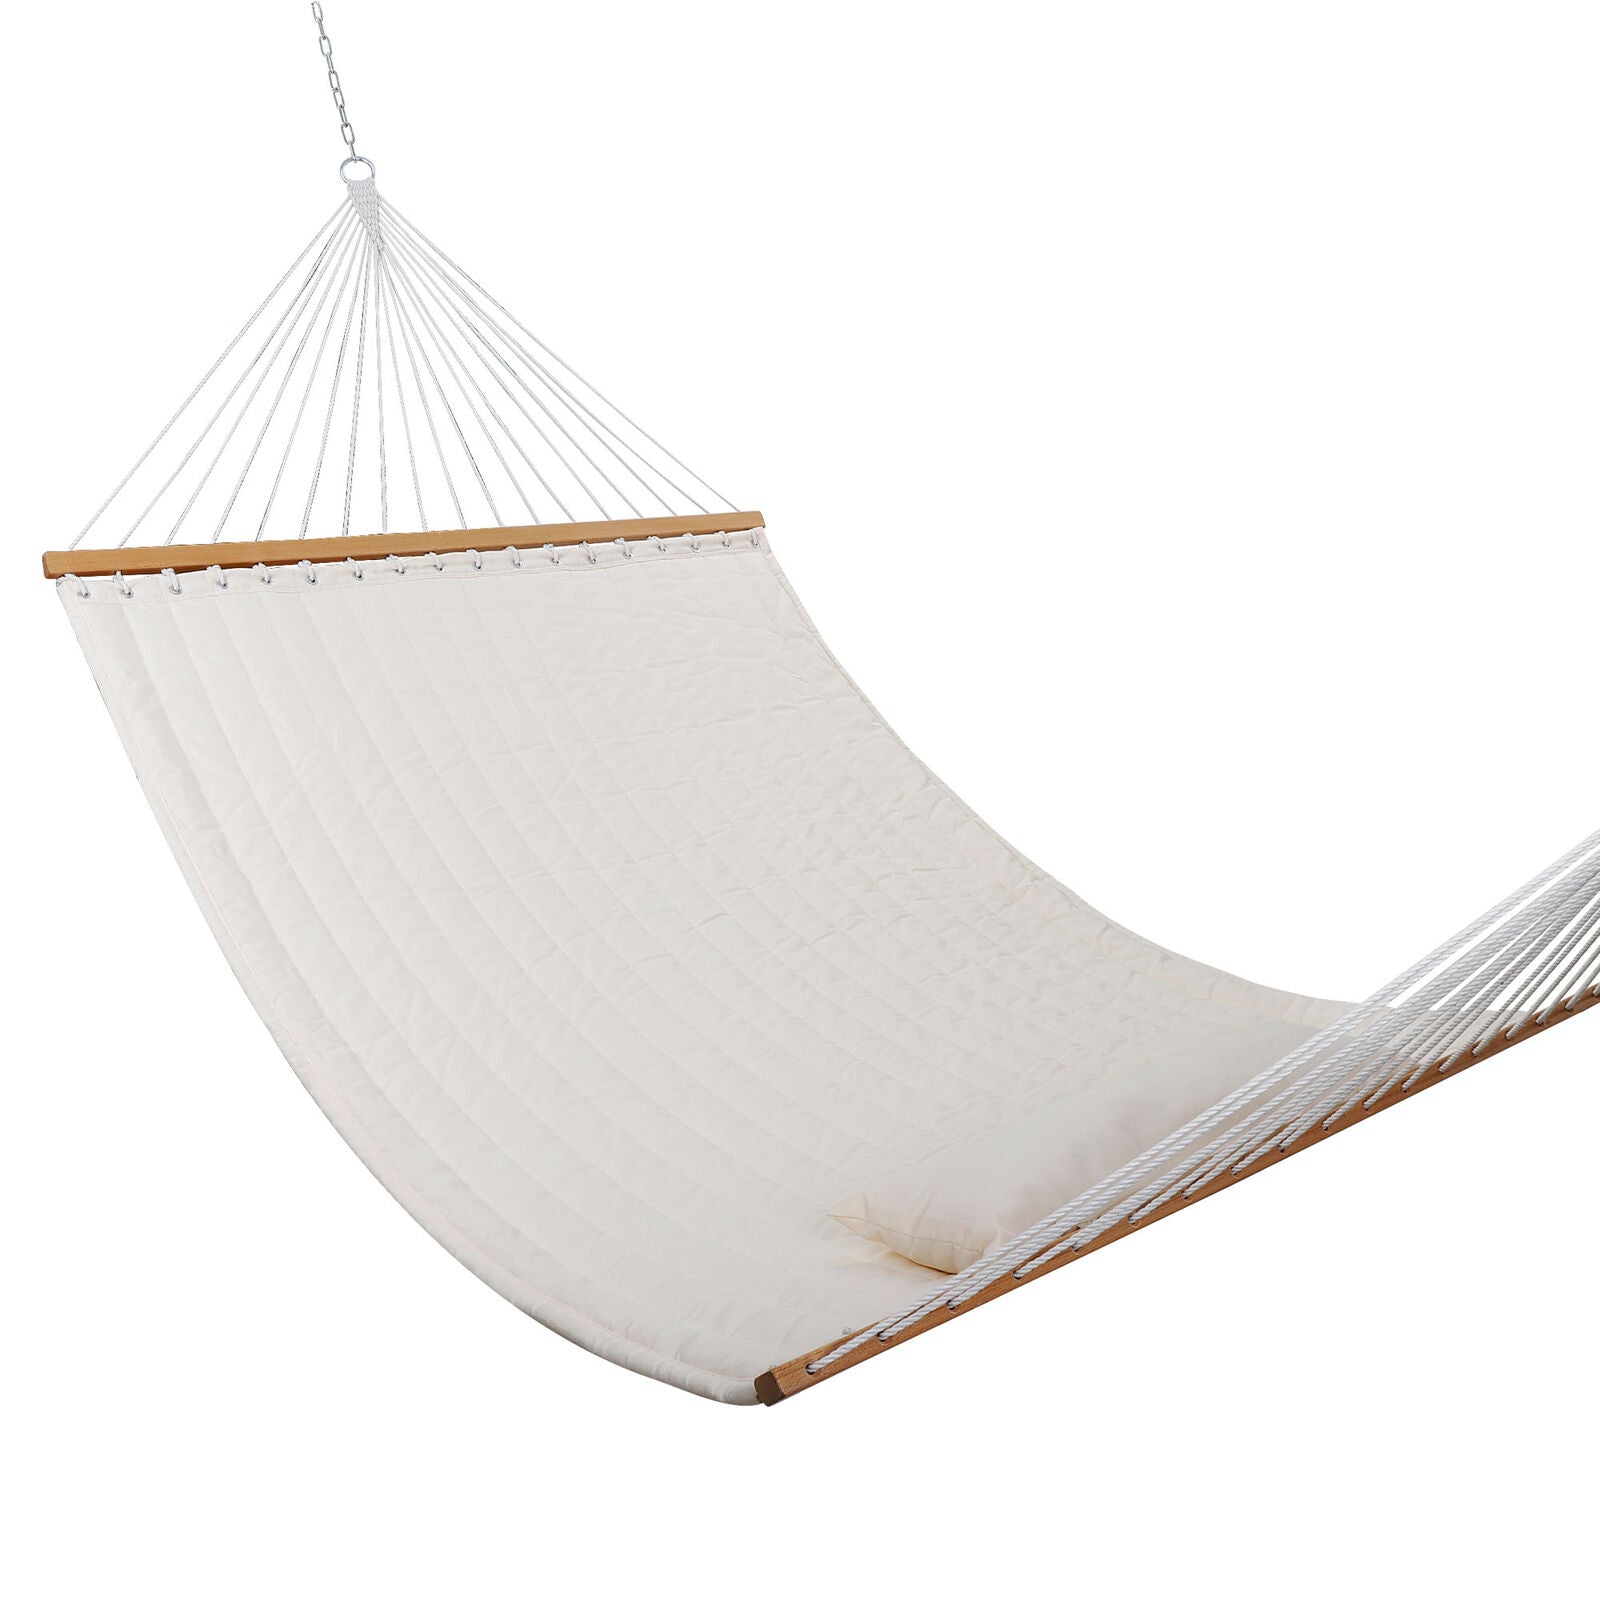 55' Hammocks Double Quilted Fabric Swing with Pillow hammocks Natural